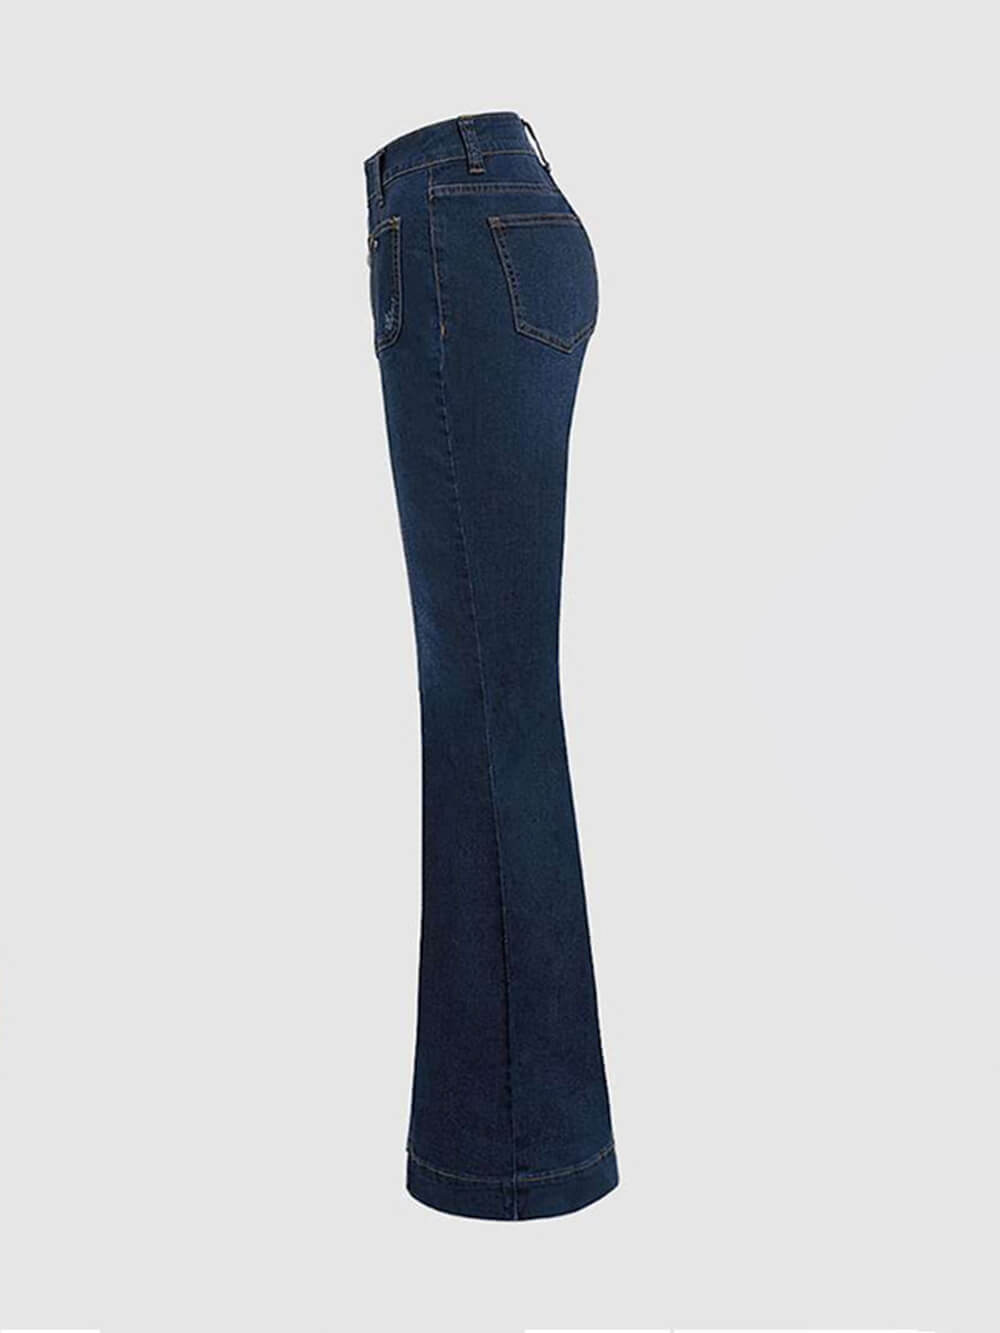 Stylish High-Waisted Patchwork Flared Jeans